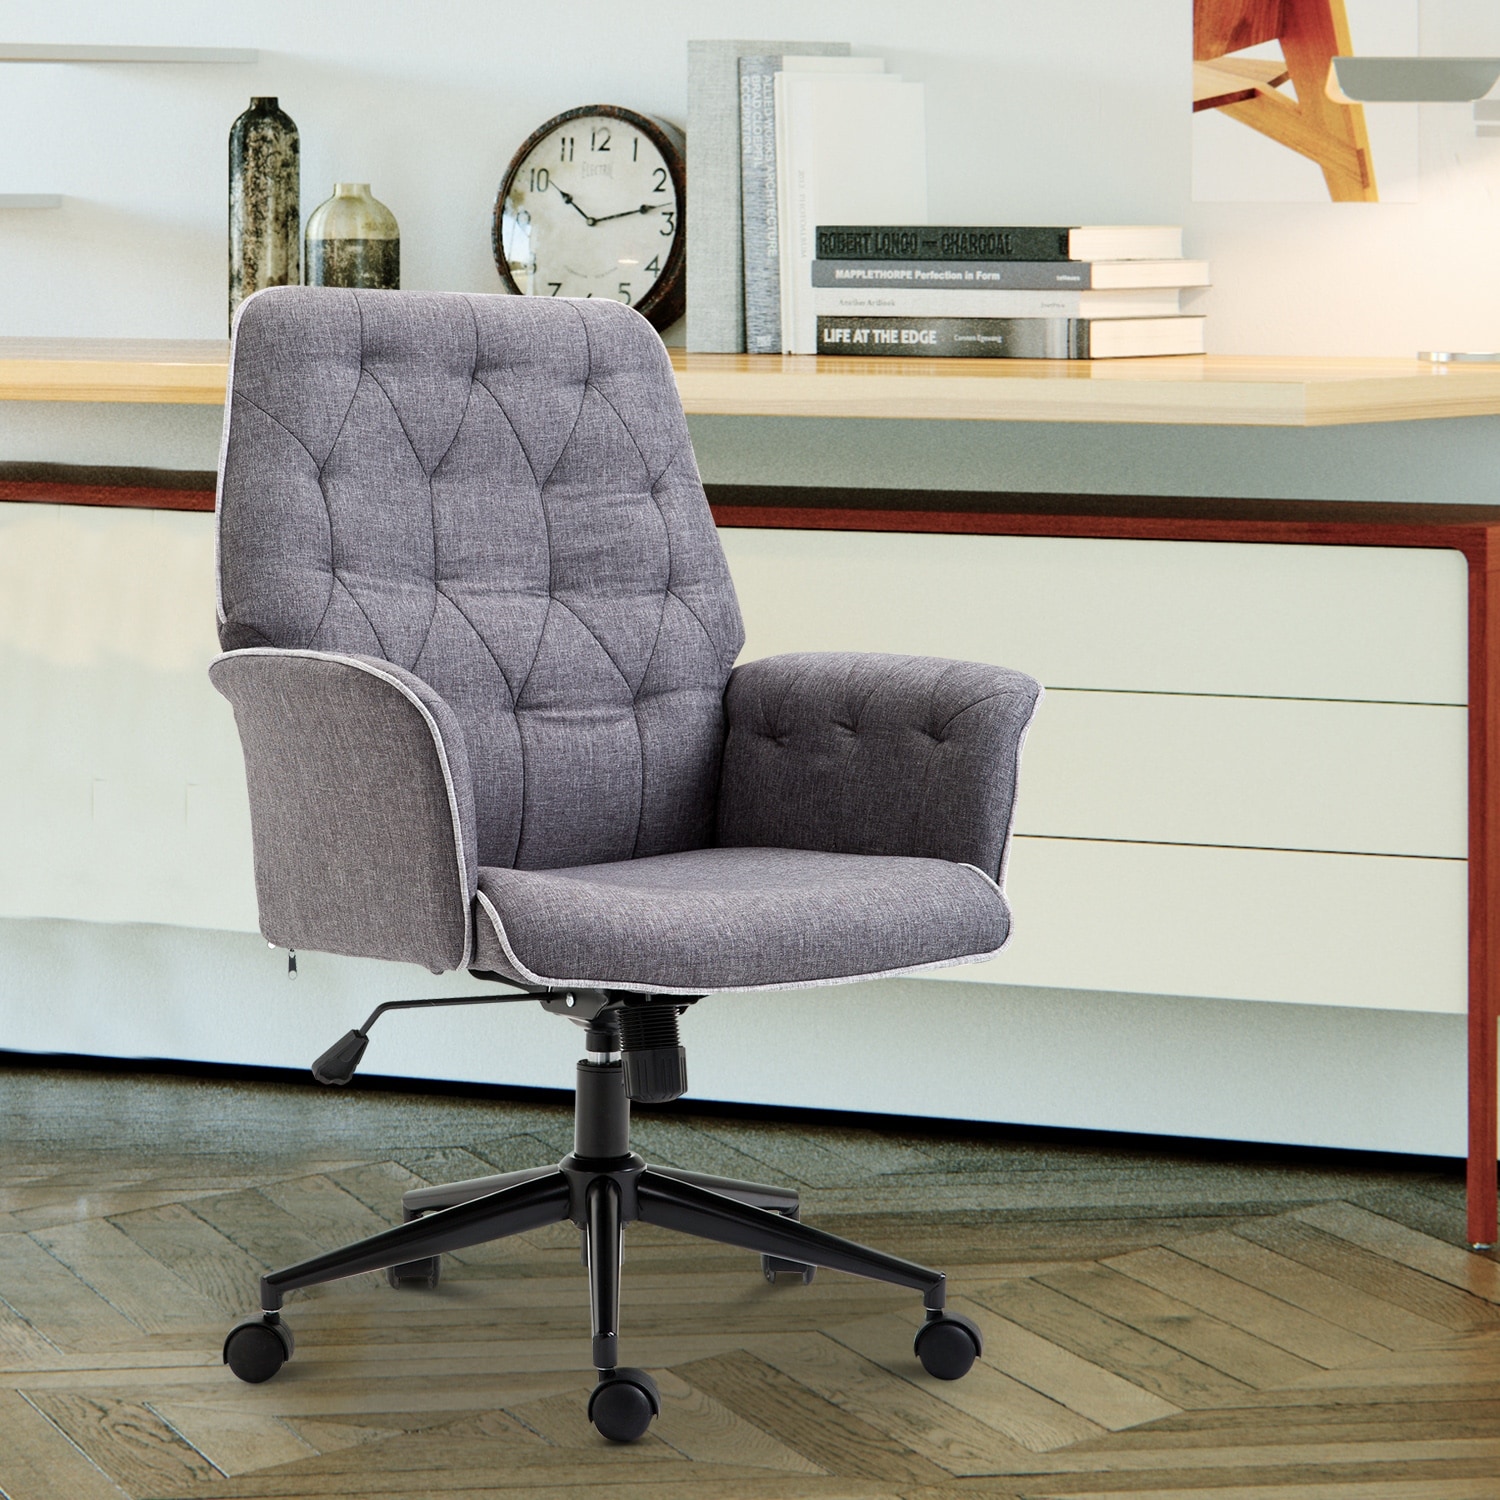 https://ak1.ostkcdn.com/images/products/is/images/direct/2e9717a69b7bafc27cbfd07d0f76299bc2c3cd6f/Adjustable-Modern-Linen-Upholstered-Office-Chair-with-Lumbar-Support-and-Arms.jpg